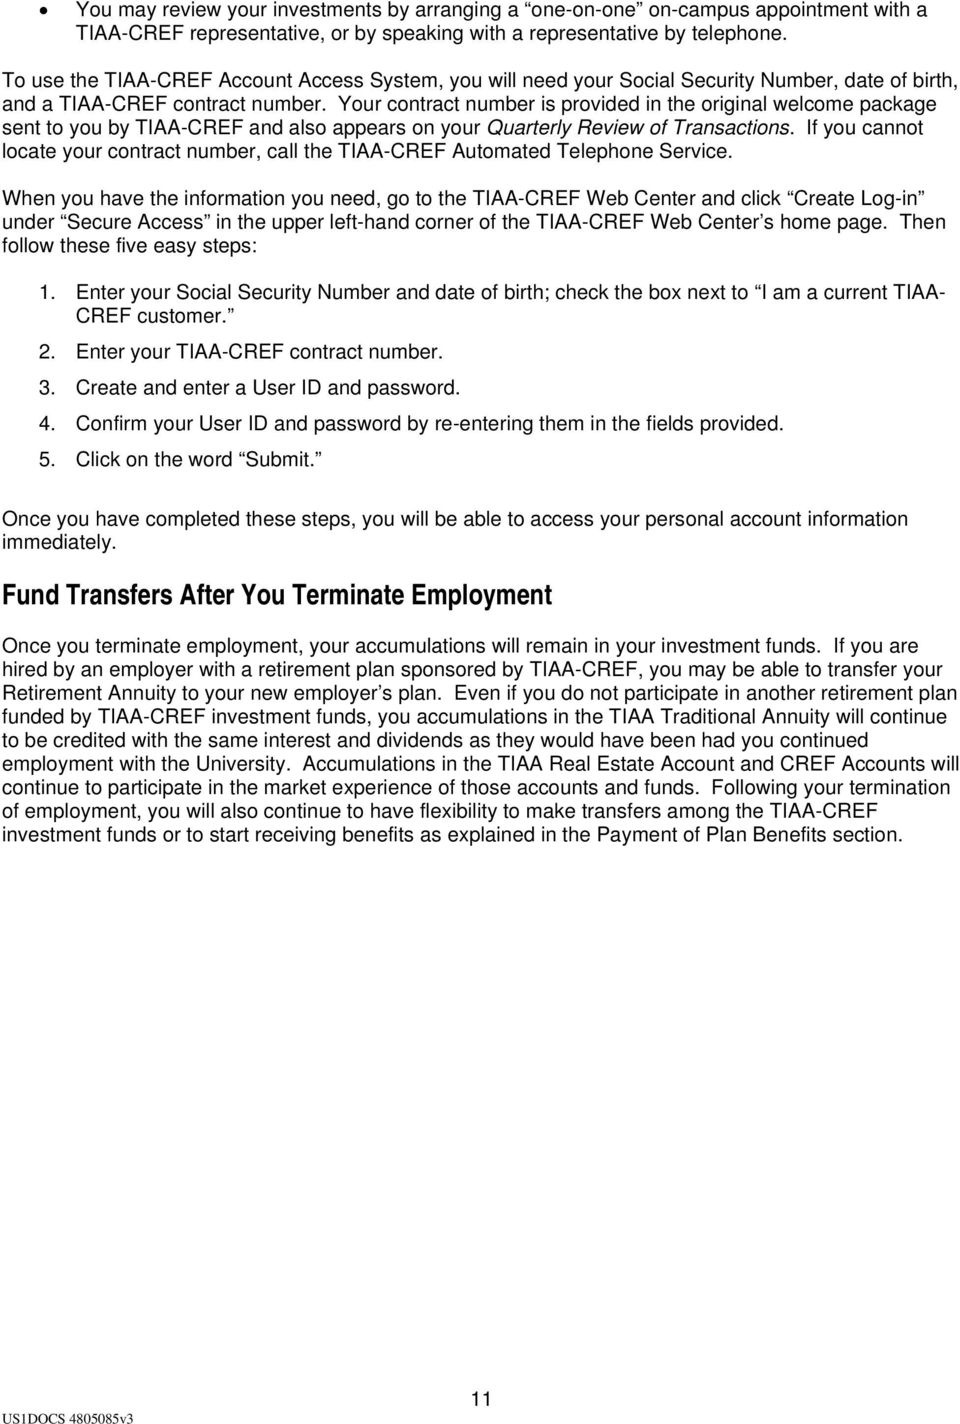 Your contract number is provided in the original welcome package sent to you by TIAA-CREF and also appears on your Quarterly Review of Transactions.